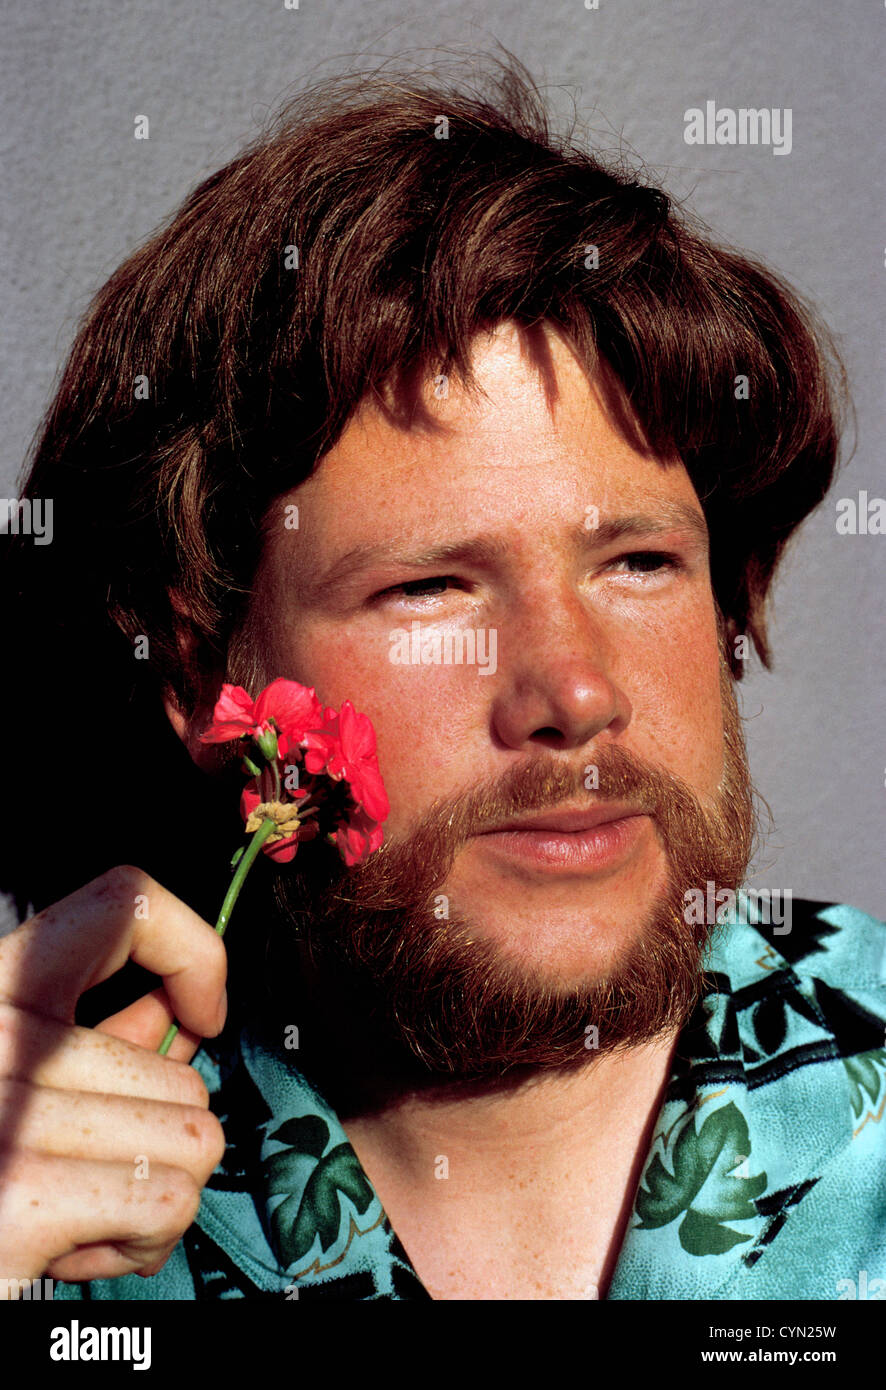 A young hippie man with long hair, beard, and flower was photographed in 1967 in San Francisco, California, USA. Stock Photo